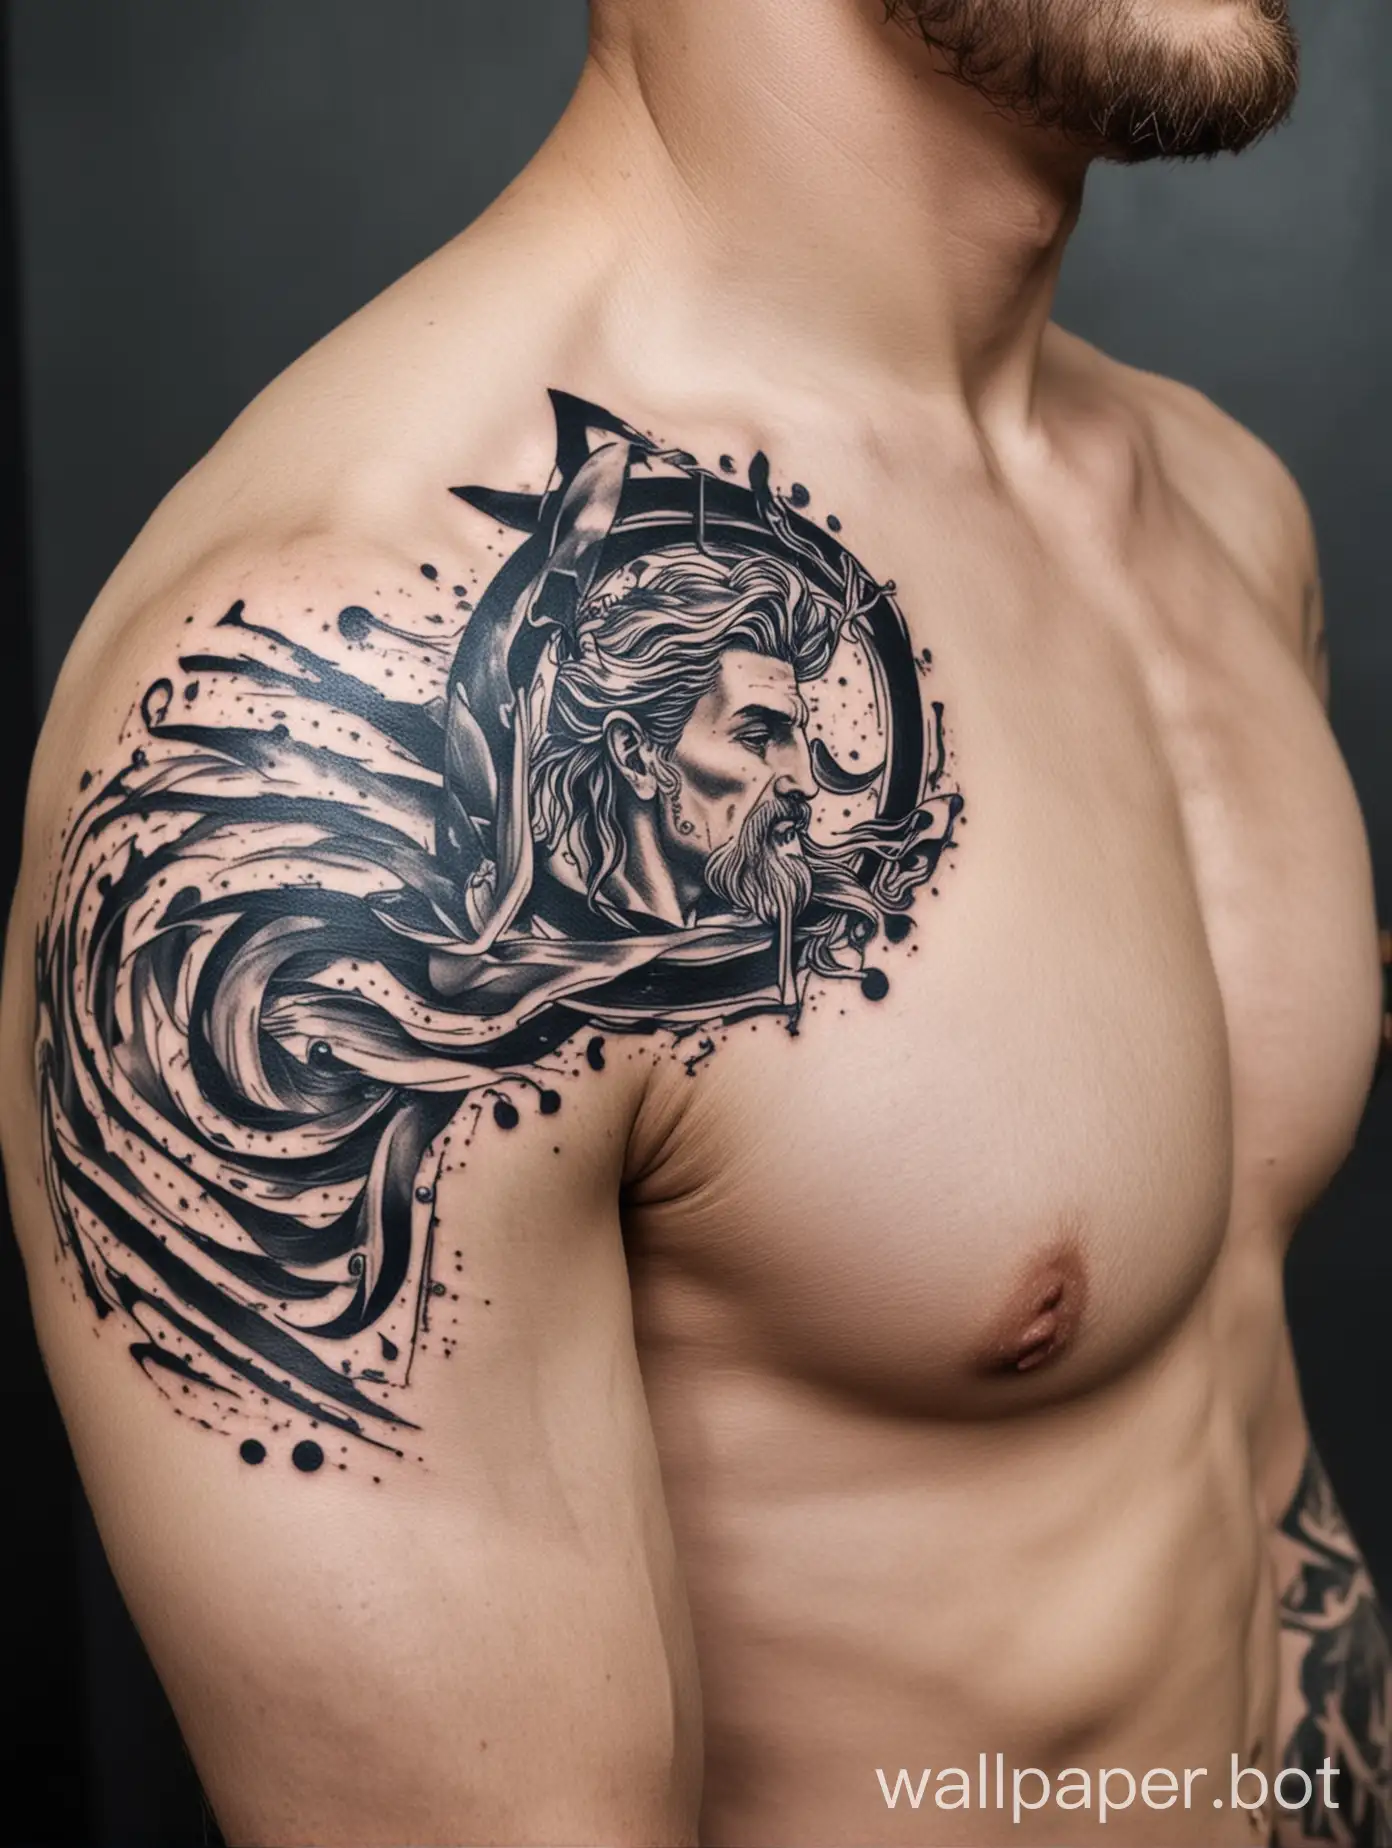 Men's Aquarius tattoo on the shoulder not colored in minimalism style